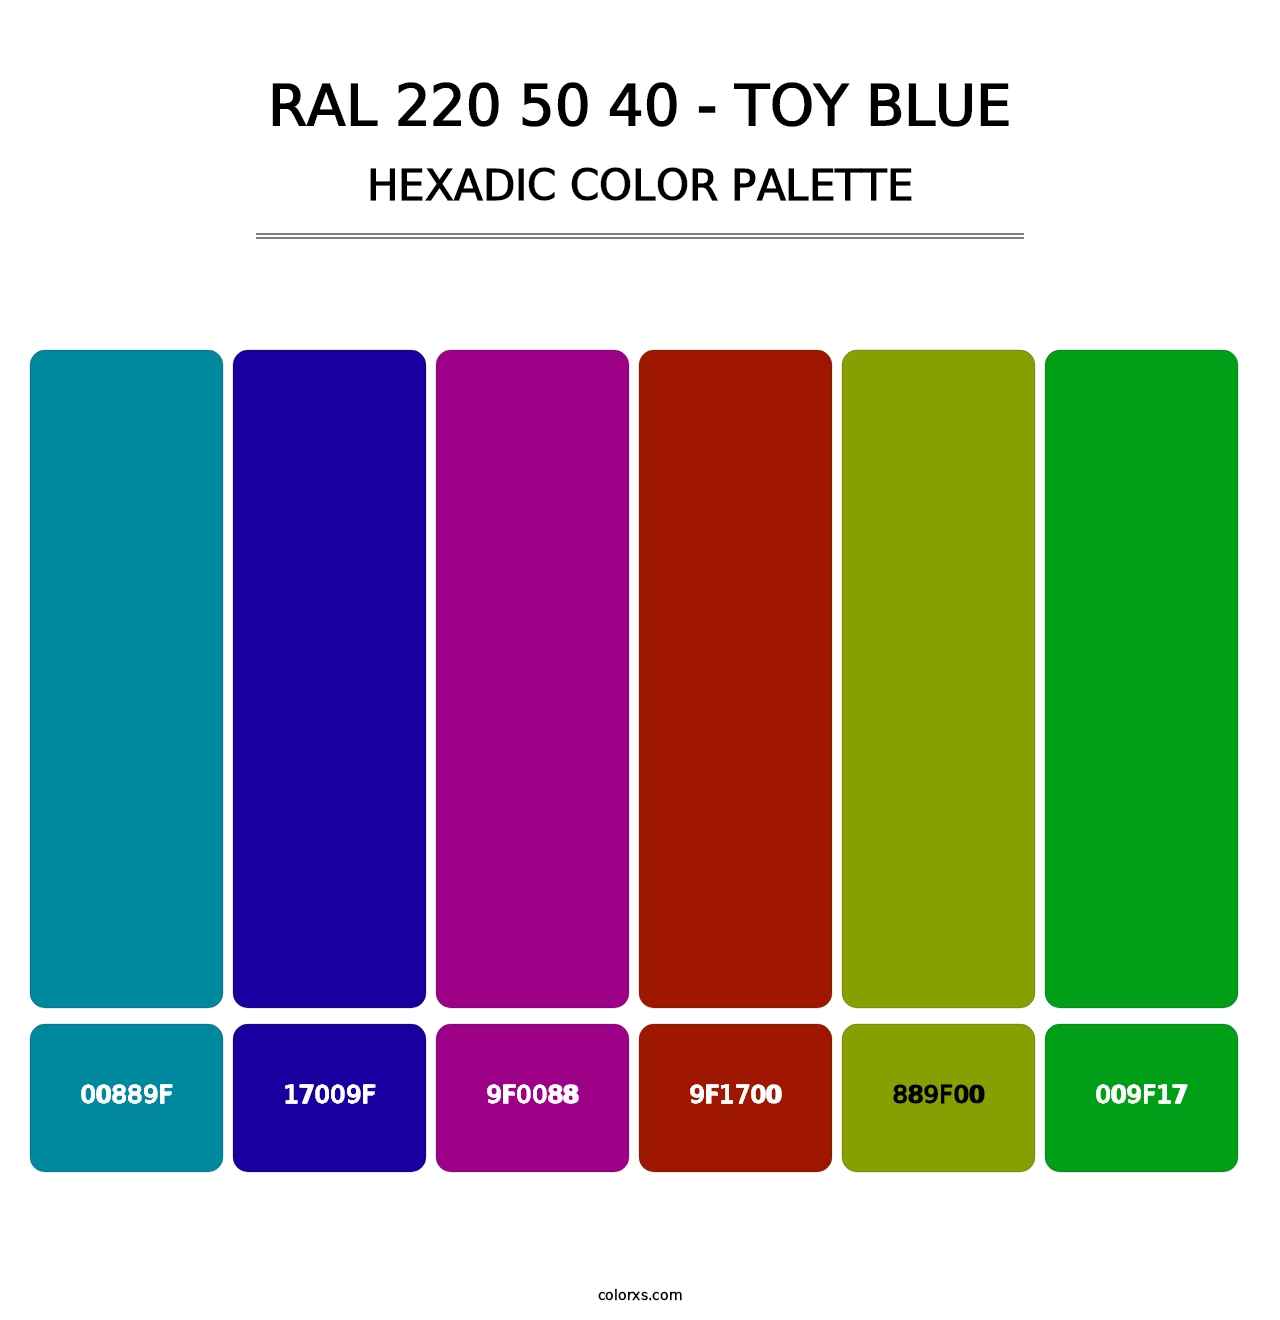 RAL 220 50 40 - Toy Blue - Hexadic Color Palette